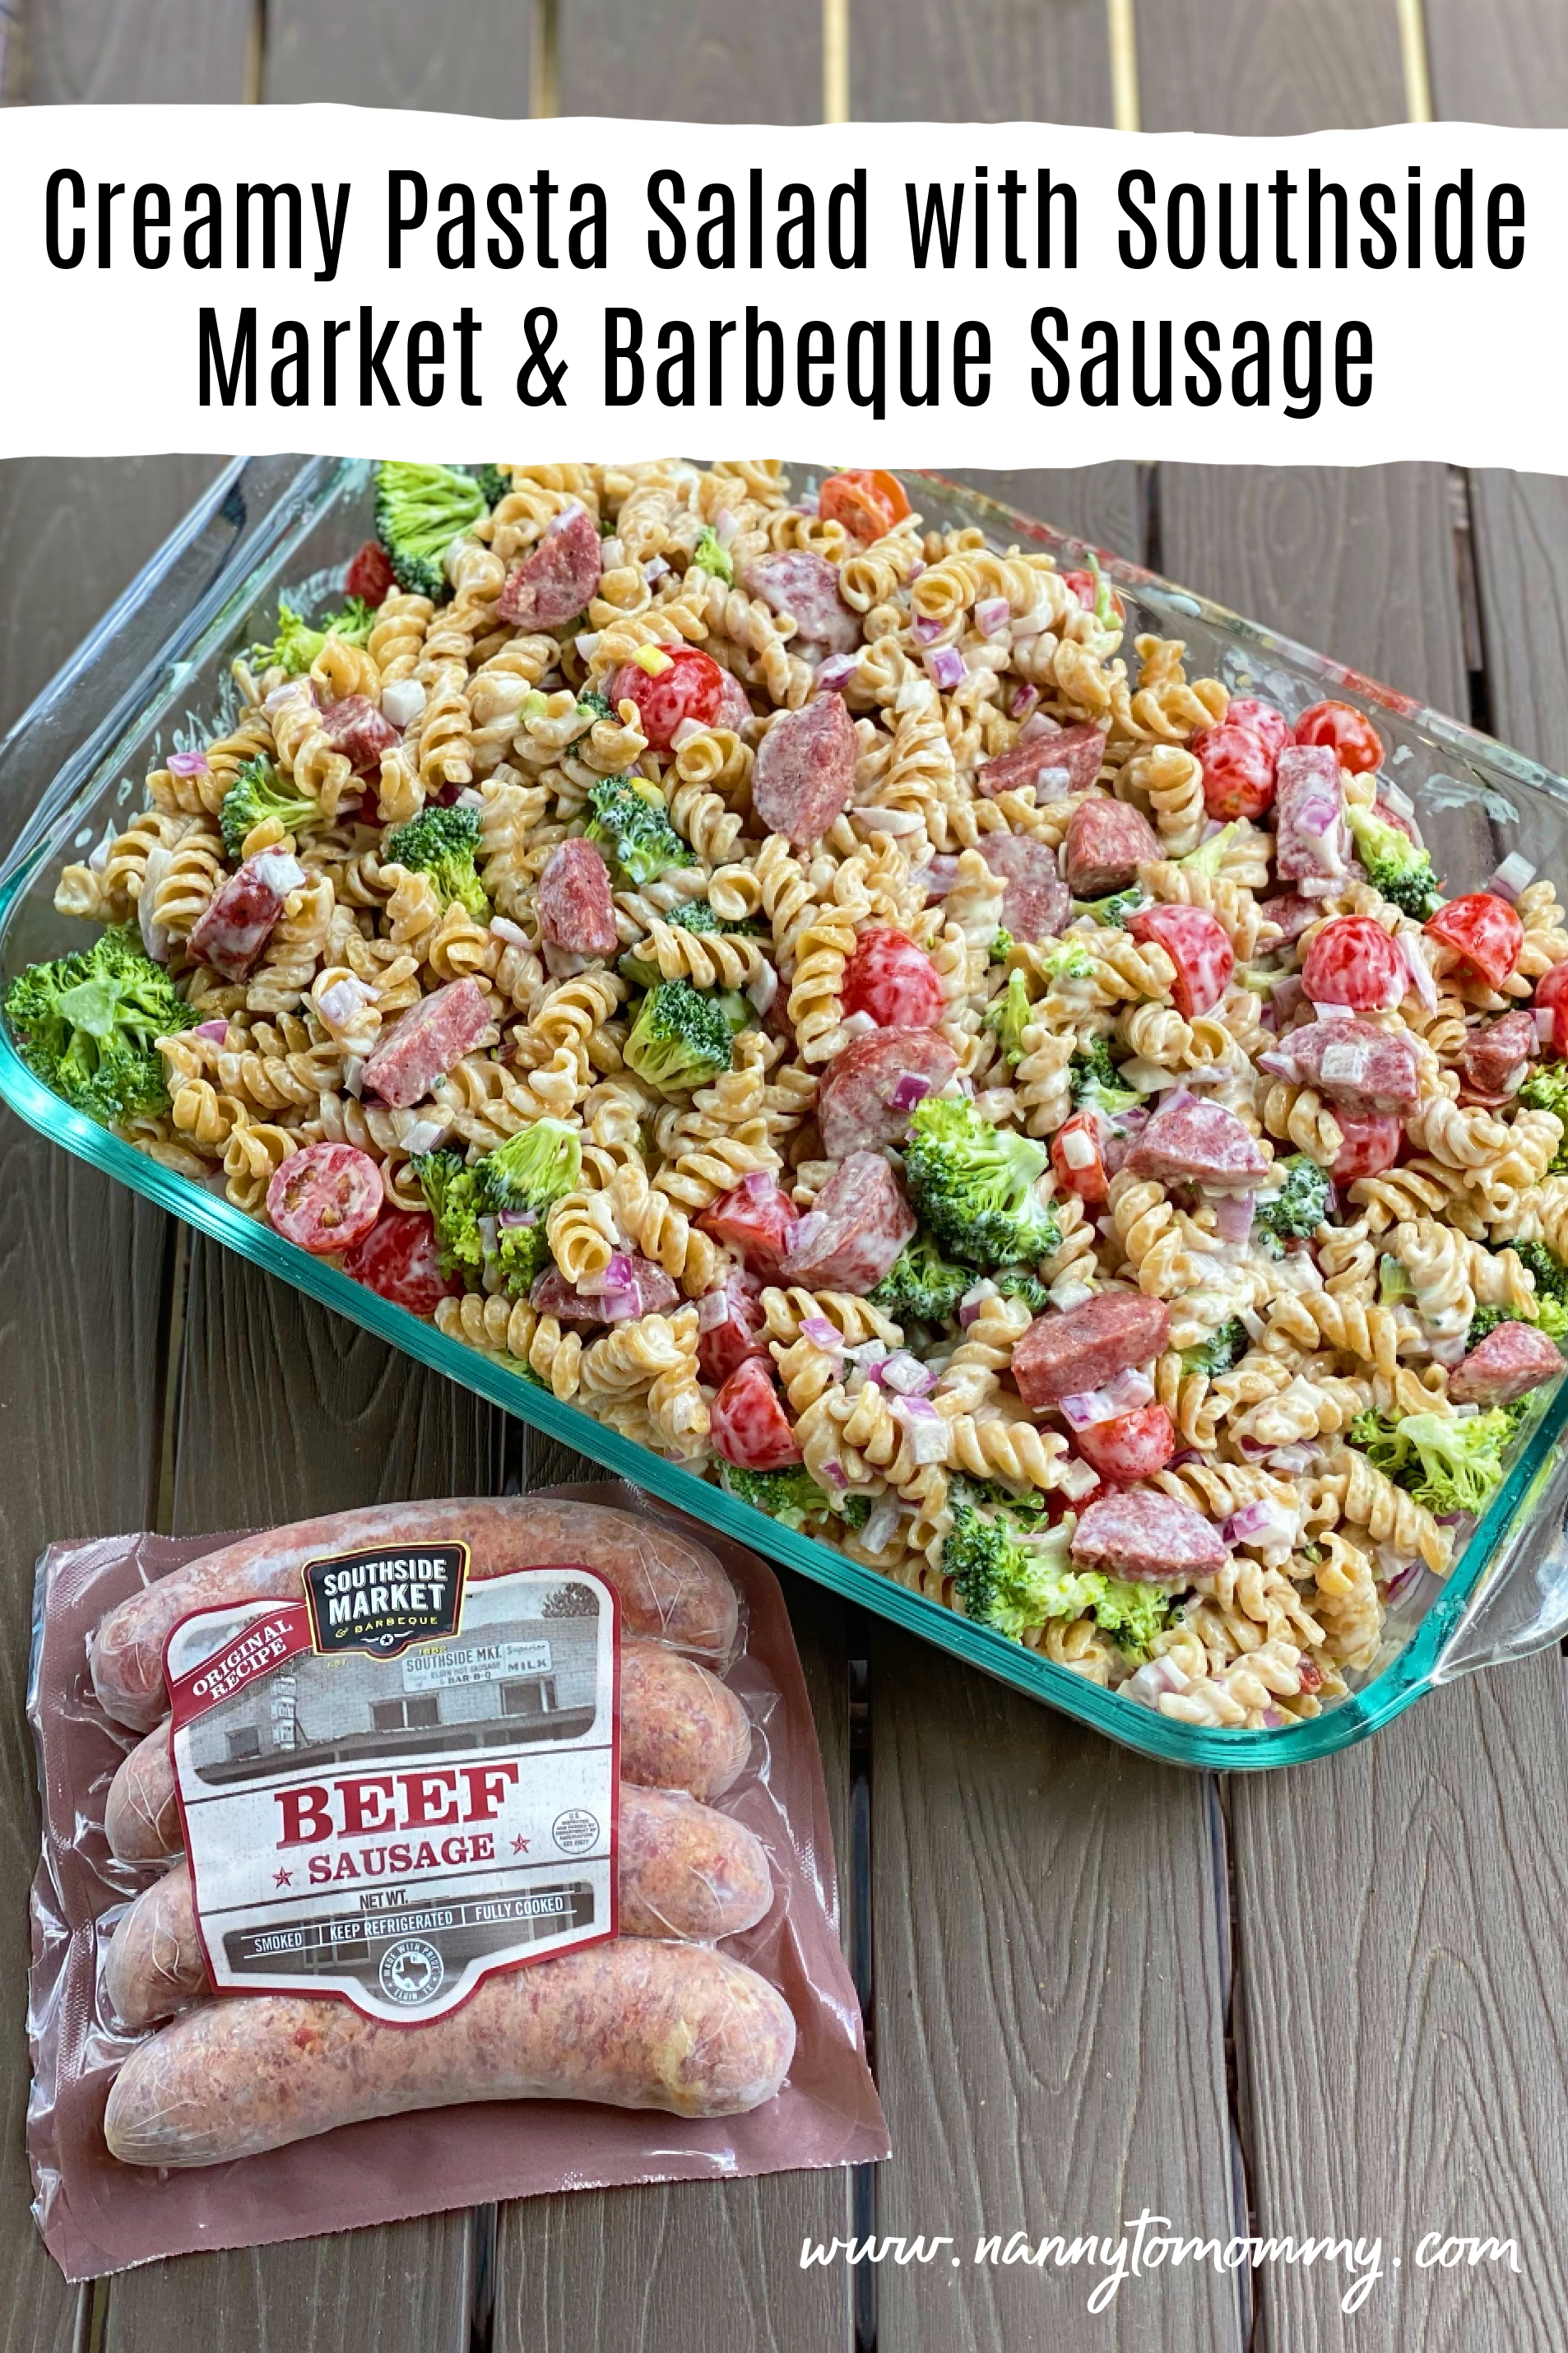 Creamy Pasta Salad with Southside Market & Barbeque Sausage Perfect Easy Recipe for Summer